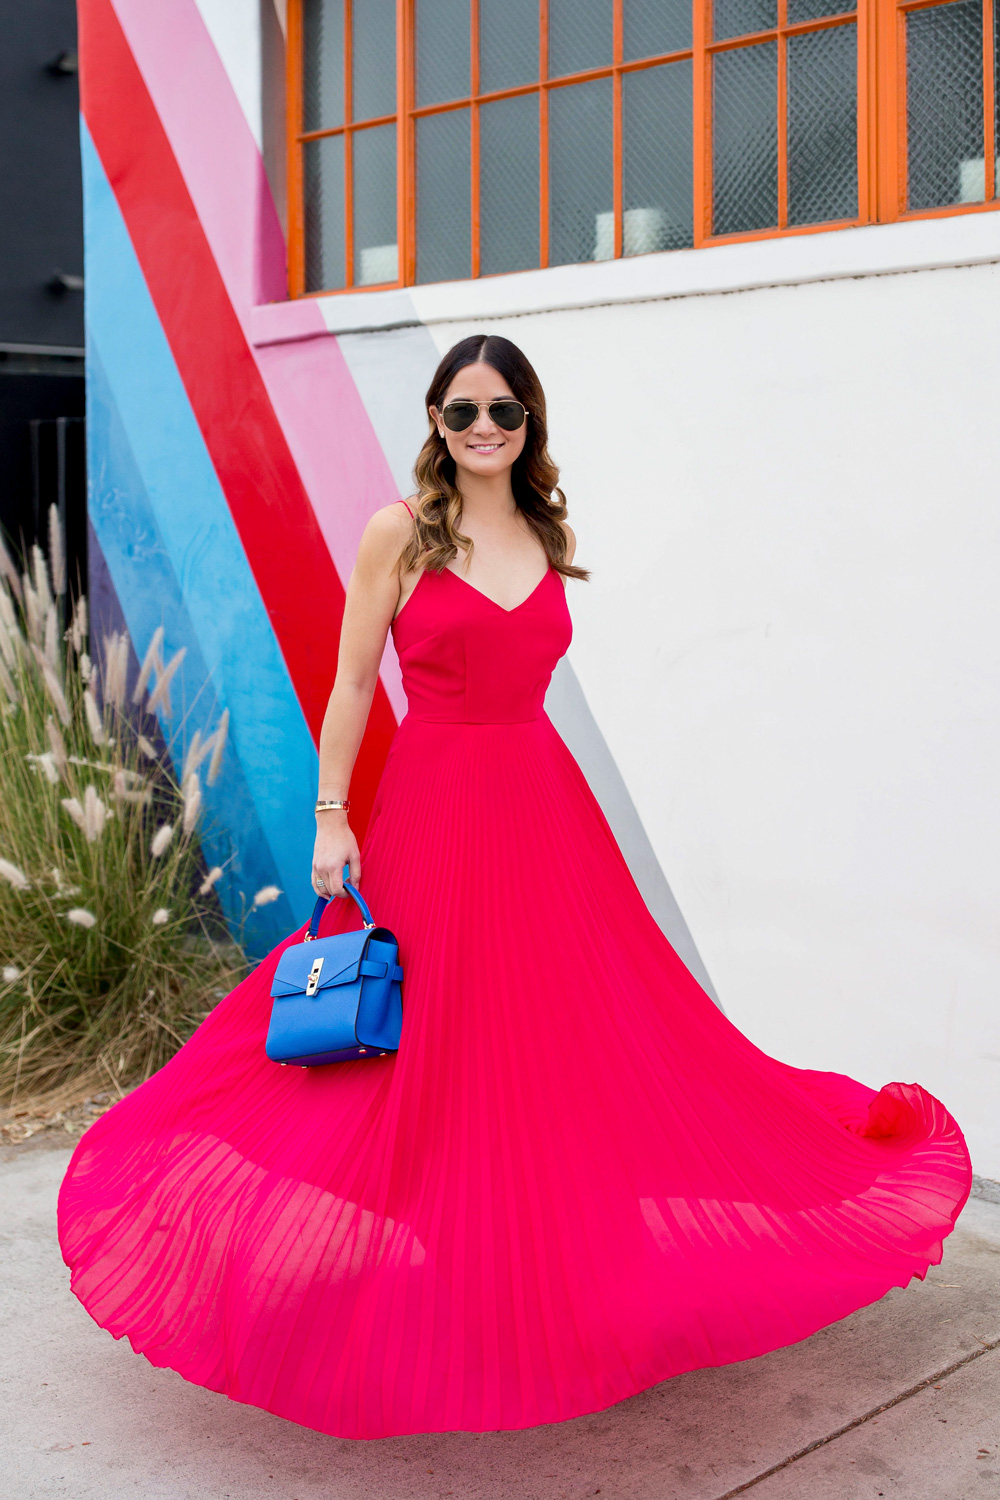 Jennifer Lake Style Charade twirling in an ASOS pink pleated maxi dress, blue Henri Bendel Mini Uptown satchel, at a striped wall in Los Angeles